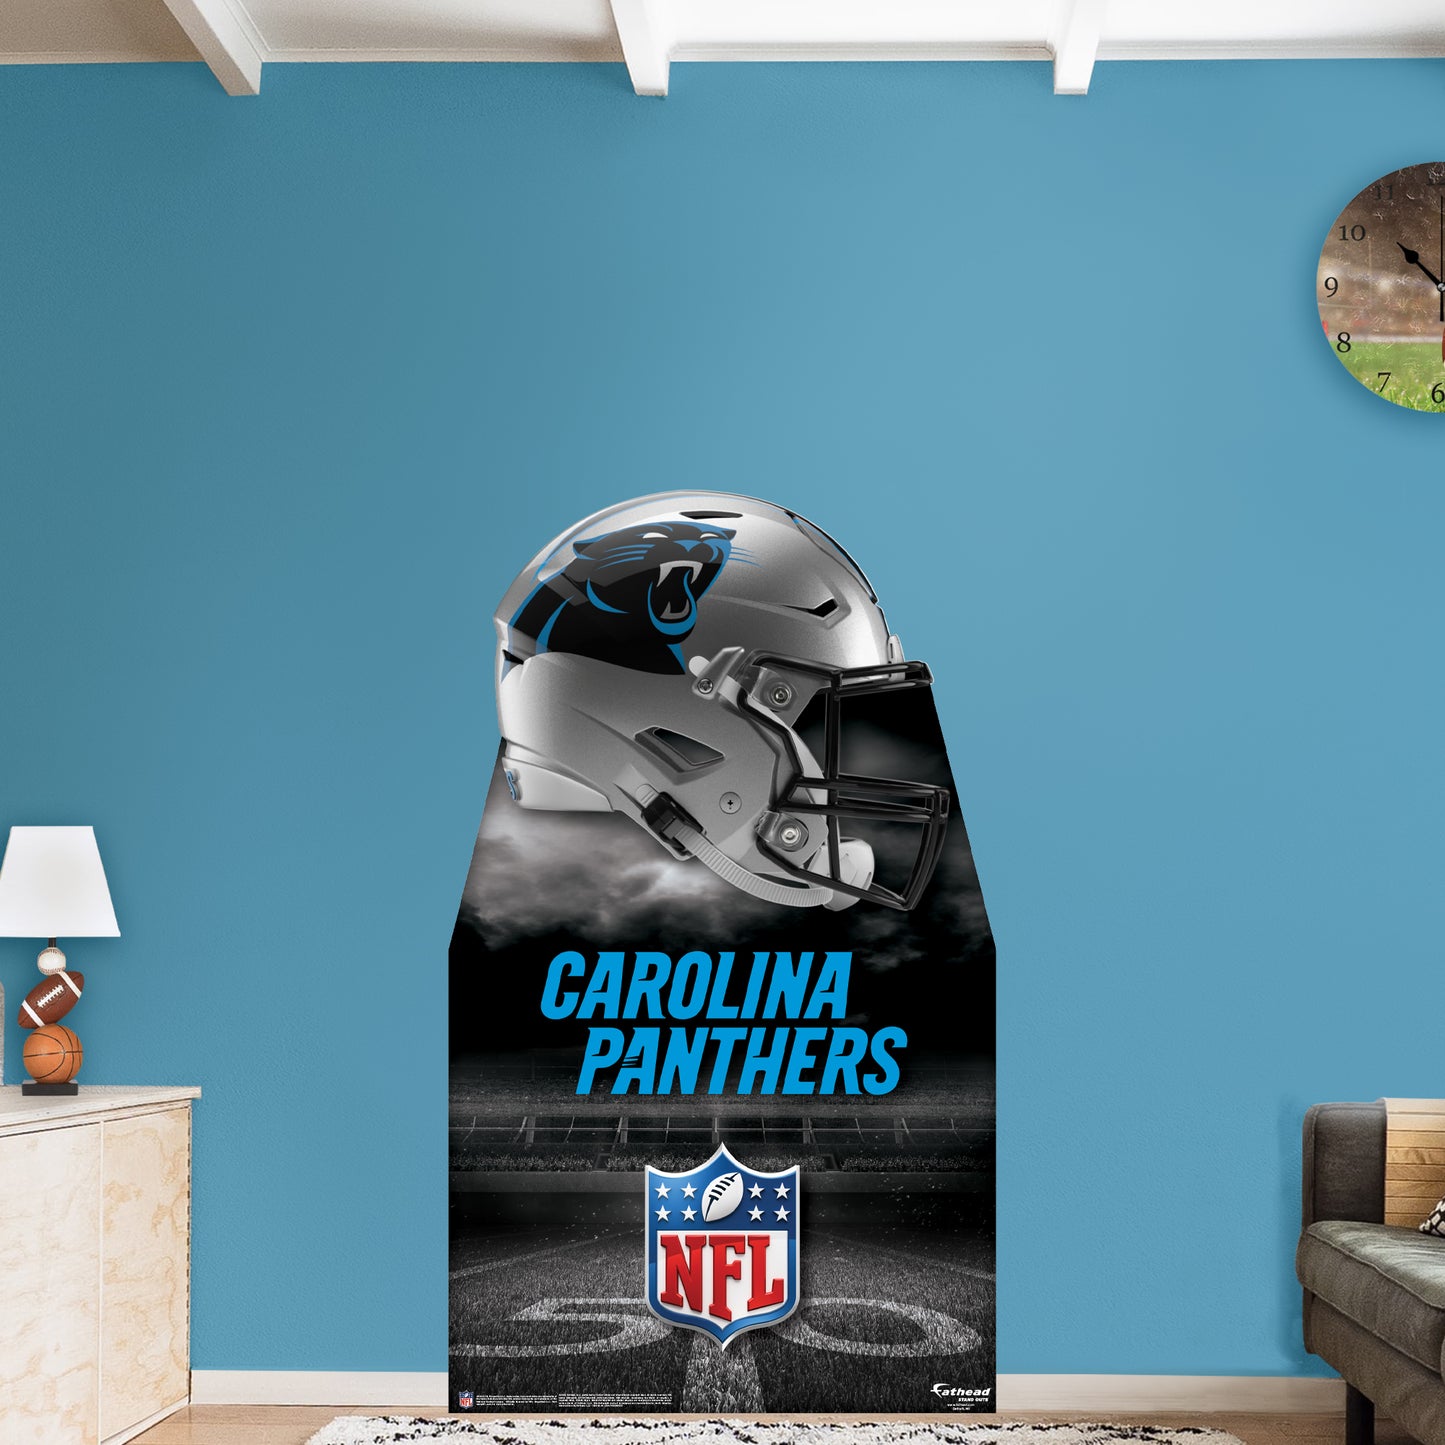 Carolina Panthers:   Helmet Stand Out Life-Size   Foam Core Cutout  - Officially Licensed NFL    Stand Out